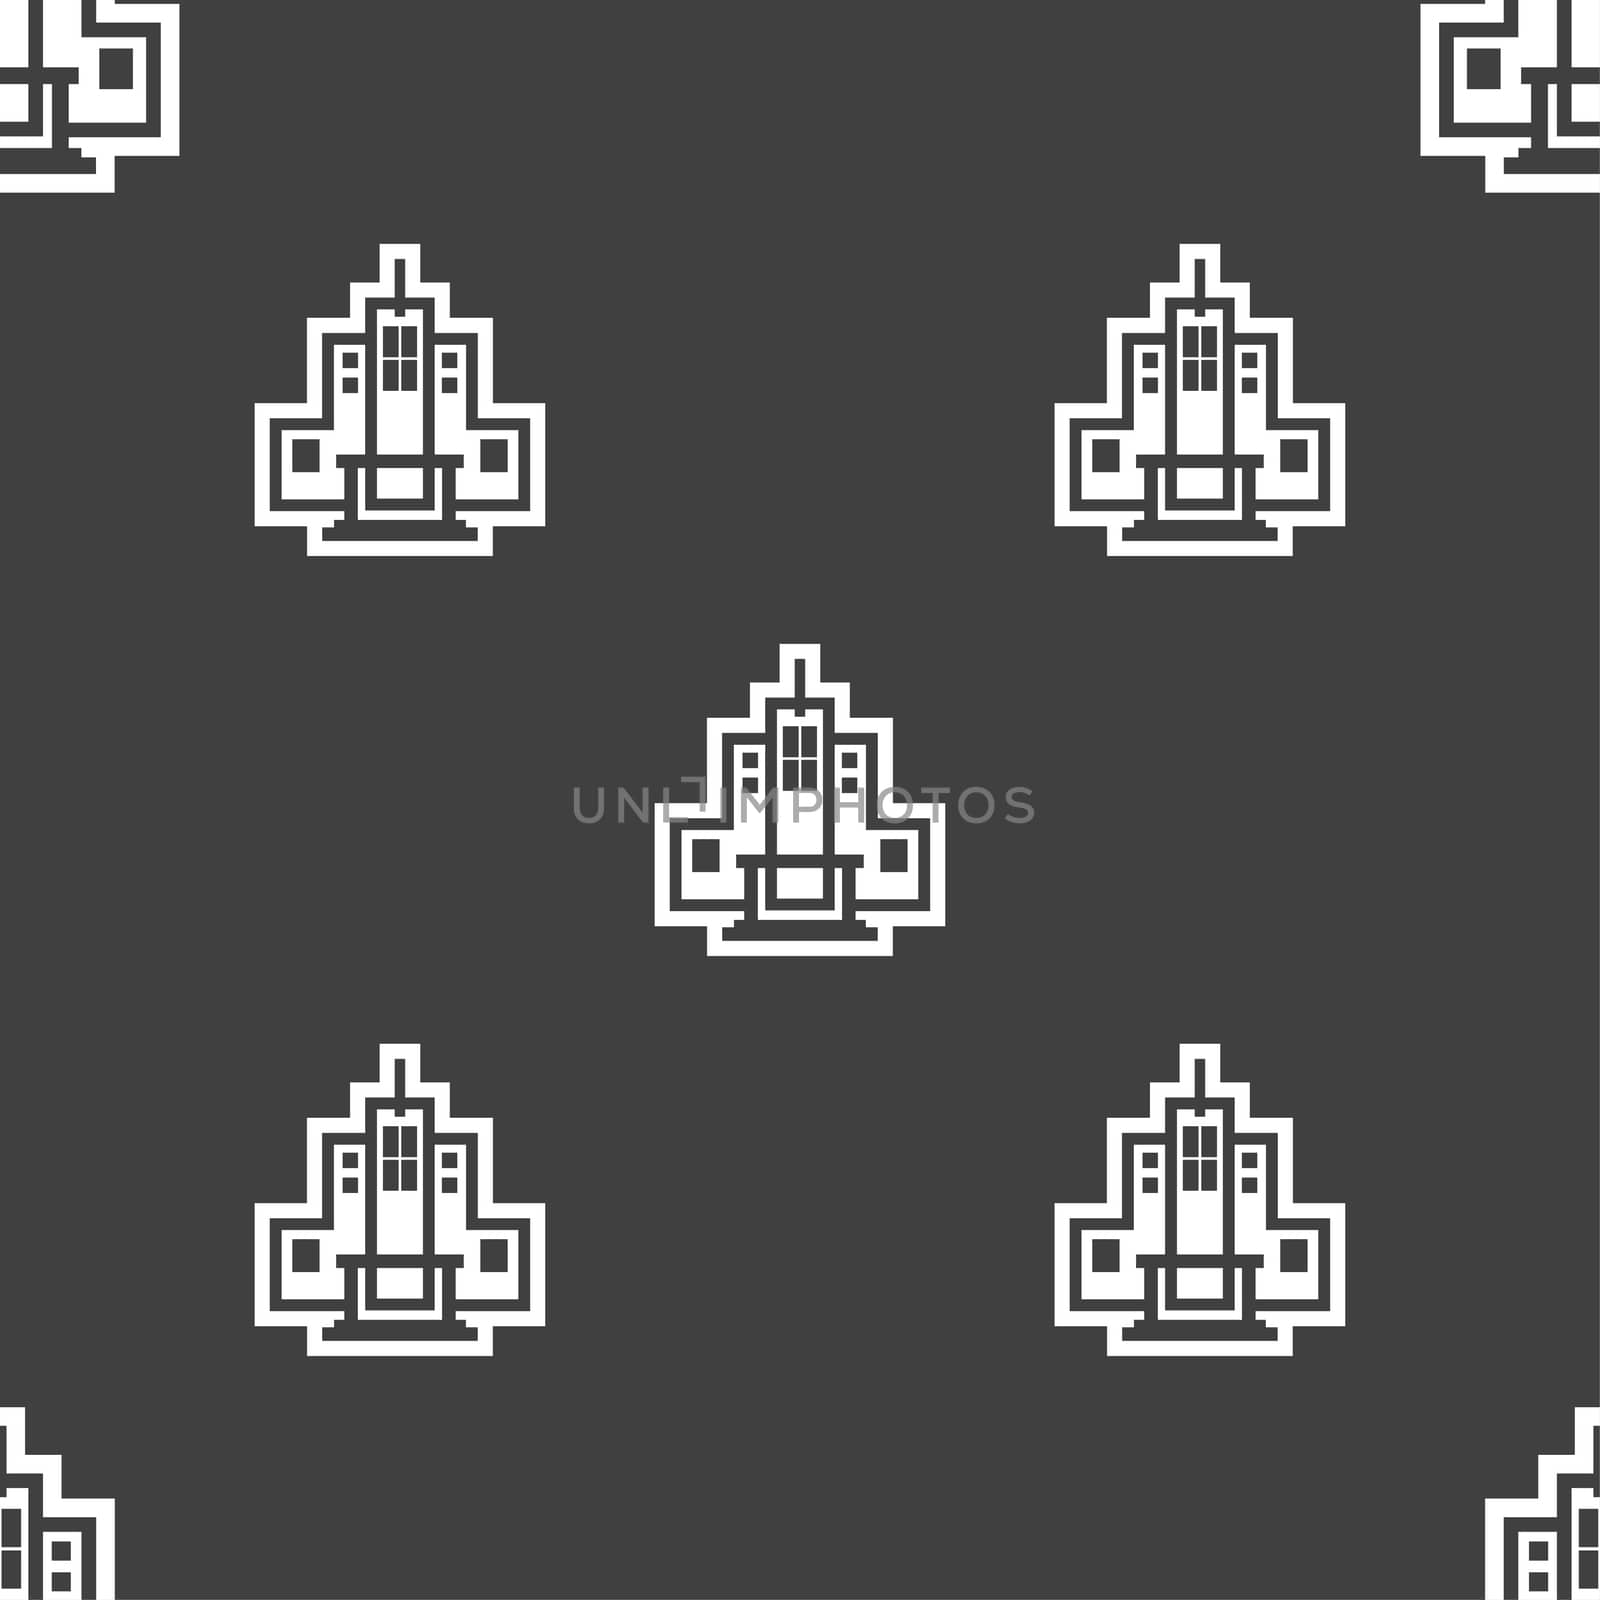 skyscraper icon sign. Seamless pattern on a gray background. illustration